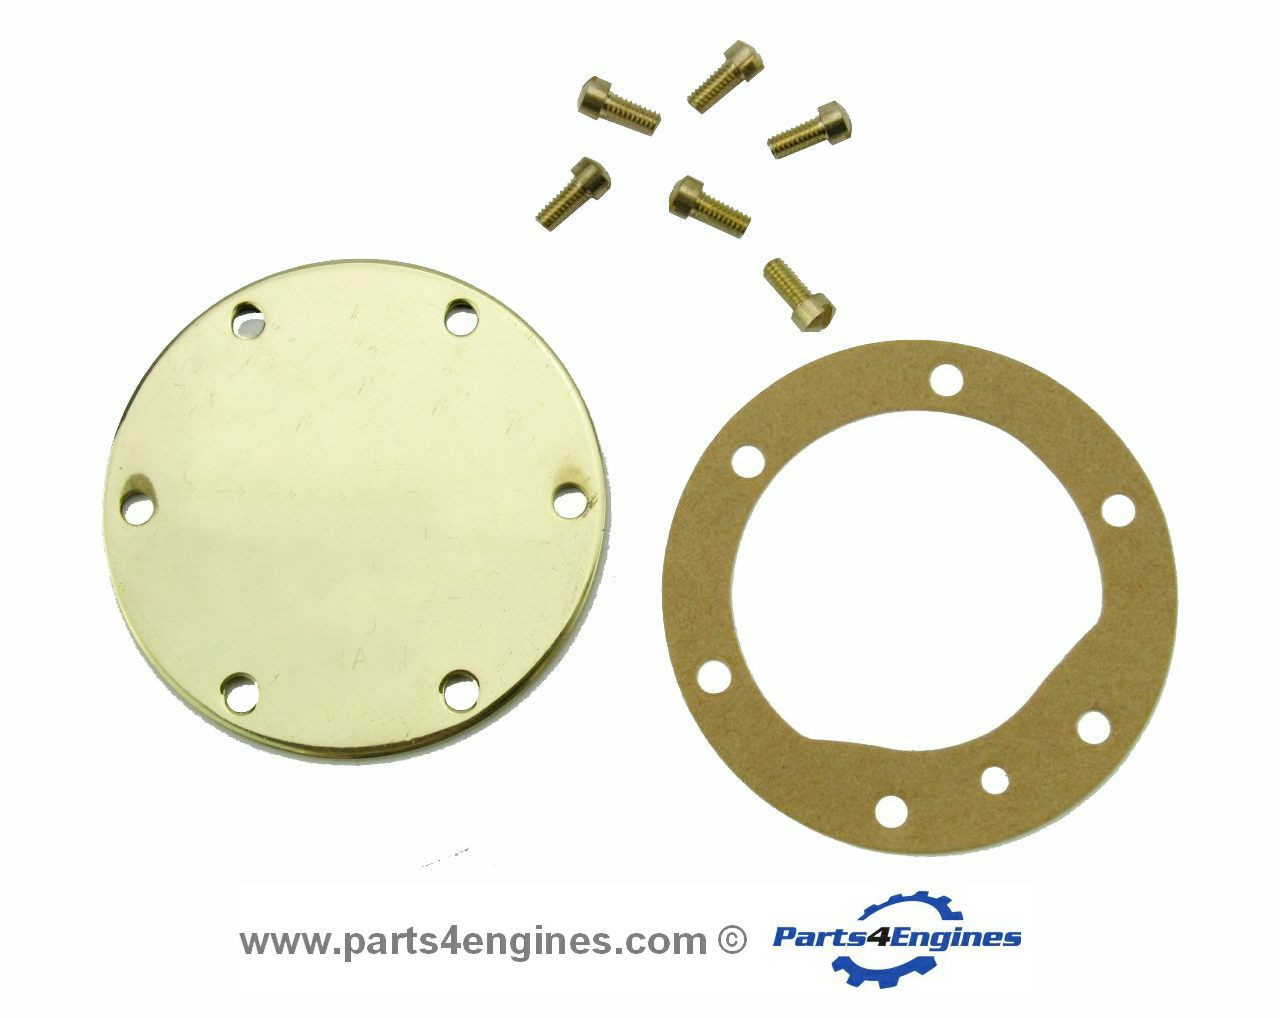 Perkins 4.108 raw water pump end cover kit from parts4engines.com